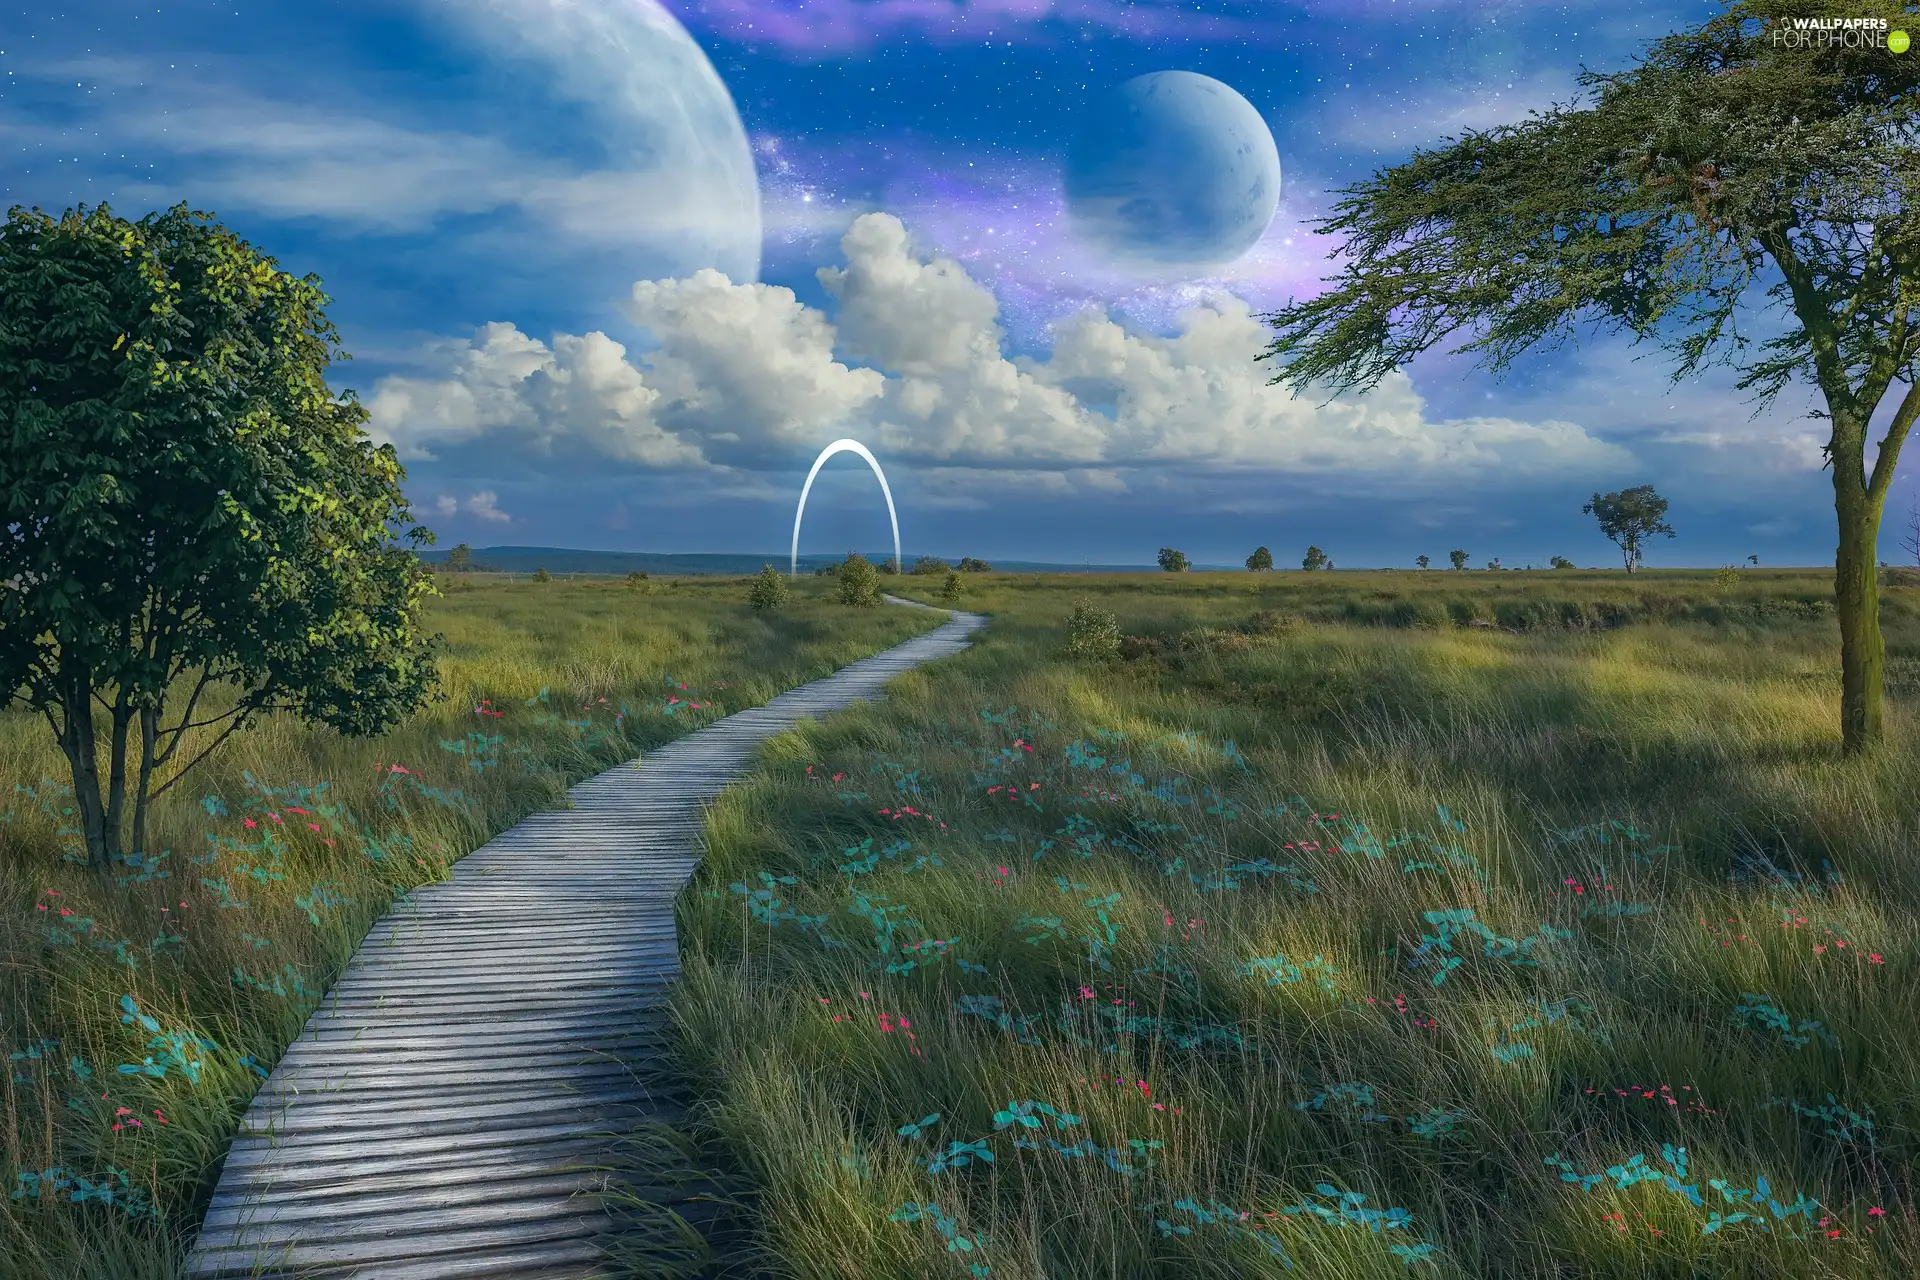 viewes, Meadow, clouds, trees, photomontage, Platform, Planets